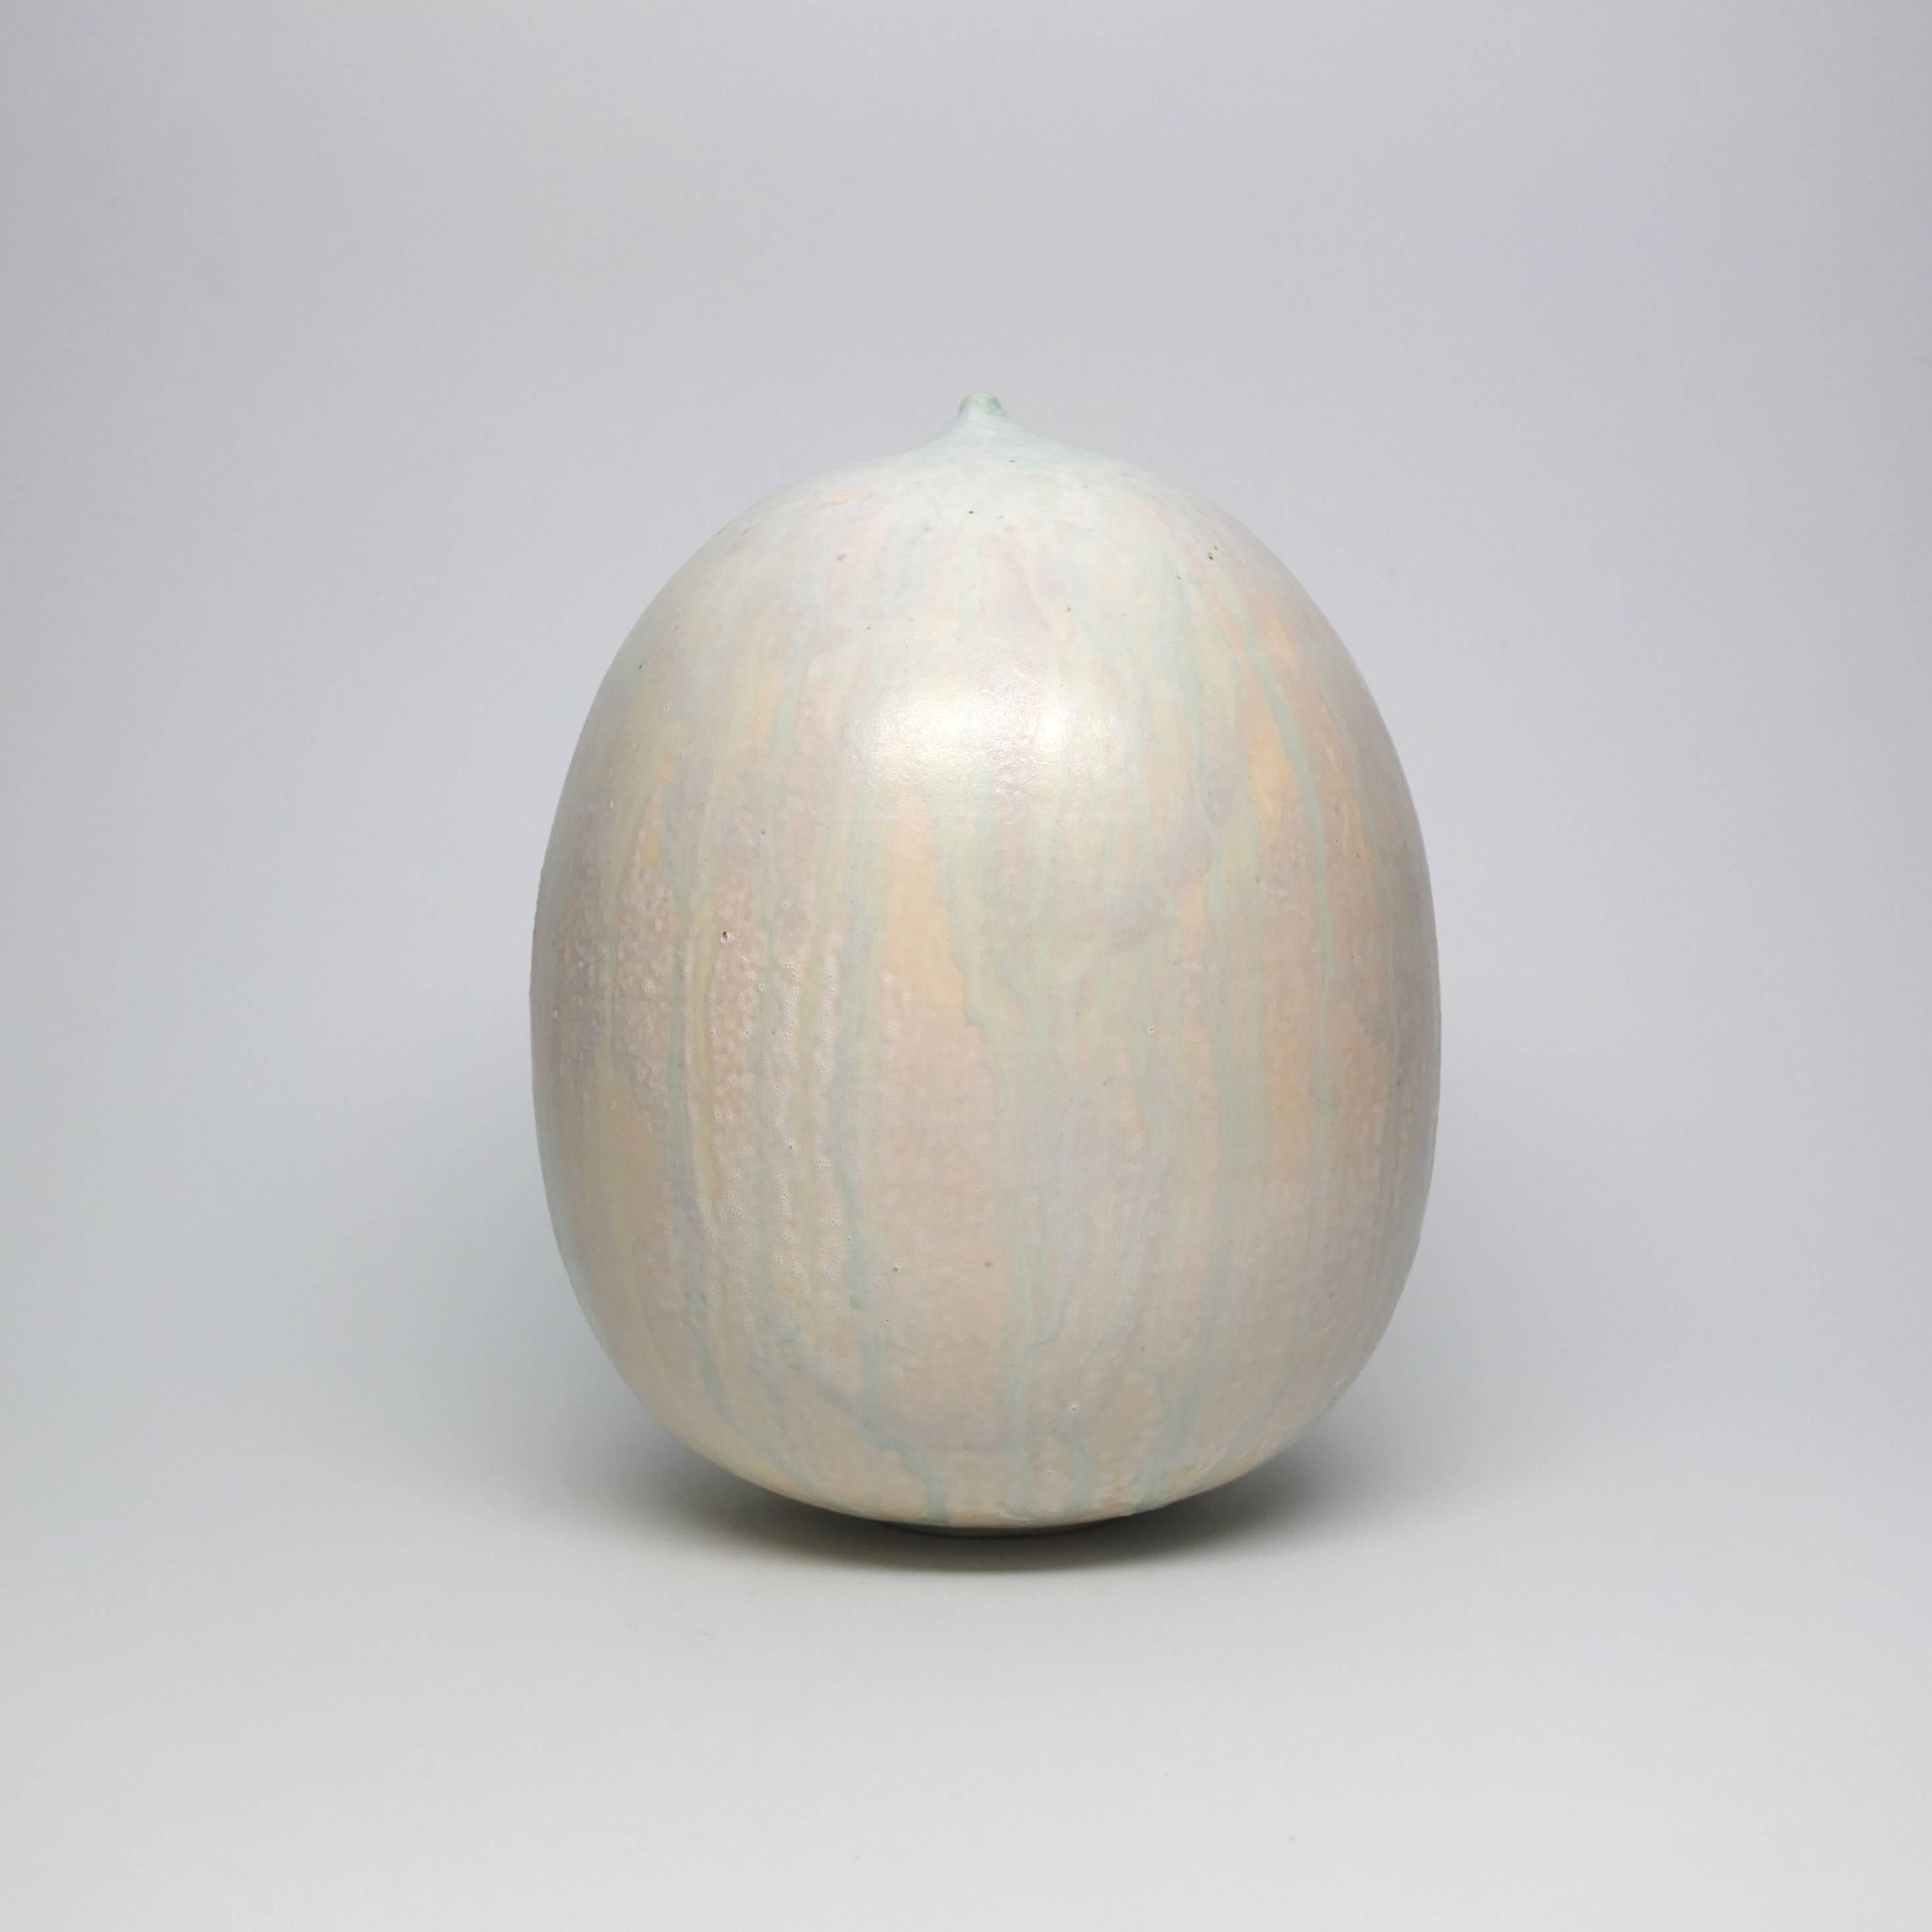 Artist bio:
New York based artist, Jeffrey Loura, creates organic, elemental vessels. Jeffrey moved to New York in 1996 to earn his BFA at Parsons school of design, where he studied Illustration. He began throwing ceramics five years later in 2001.